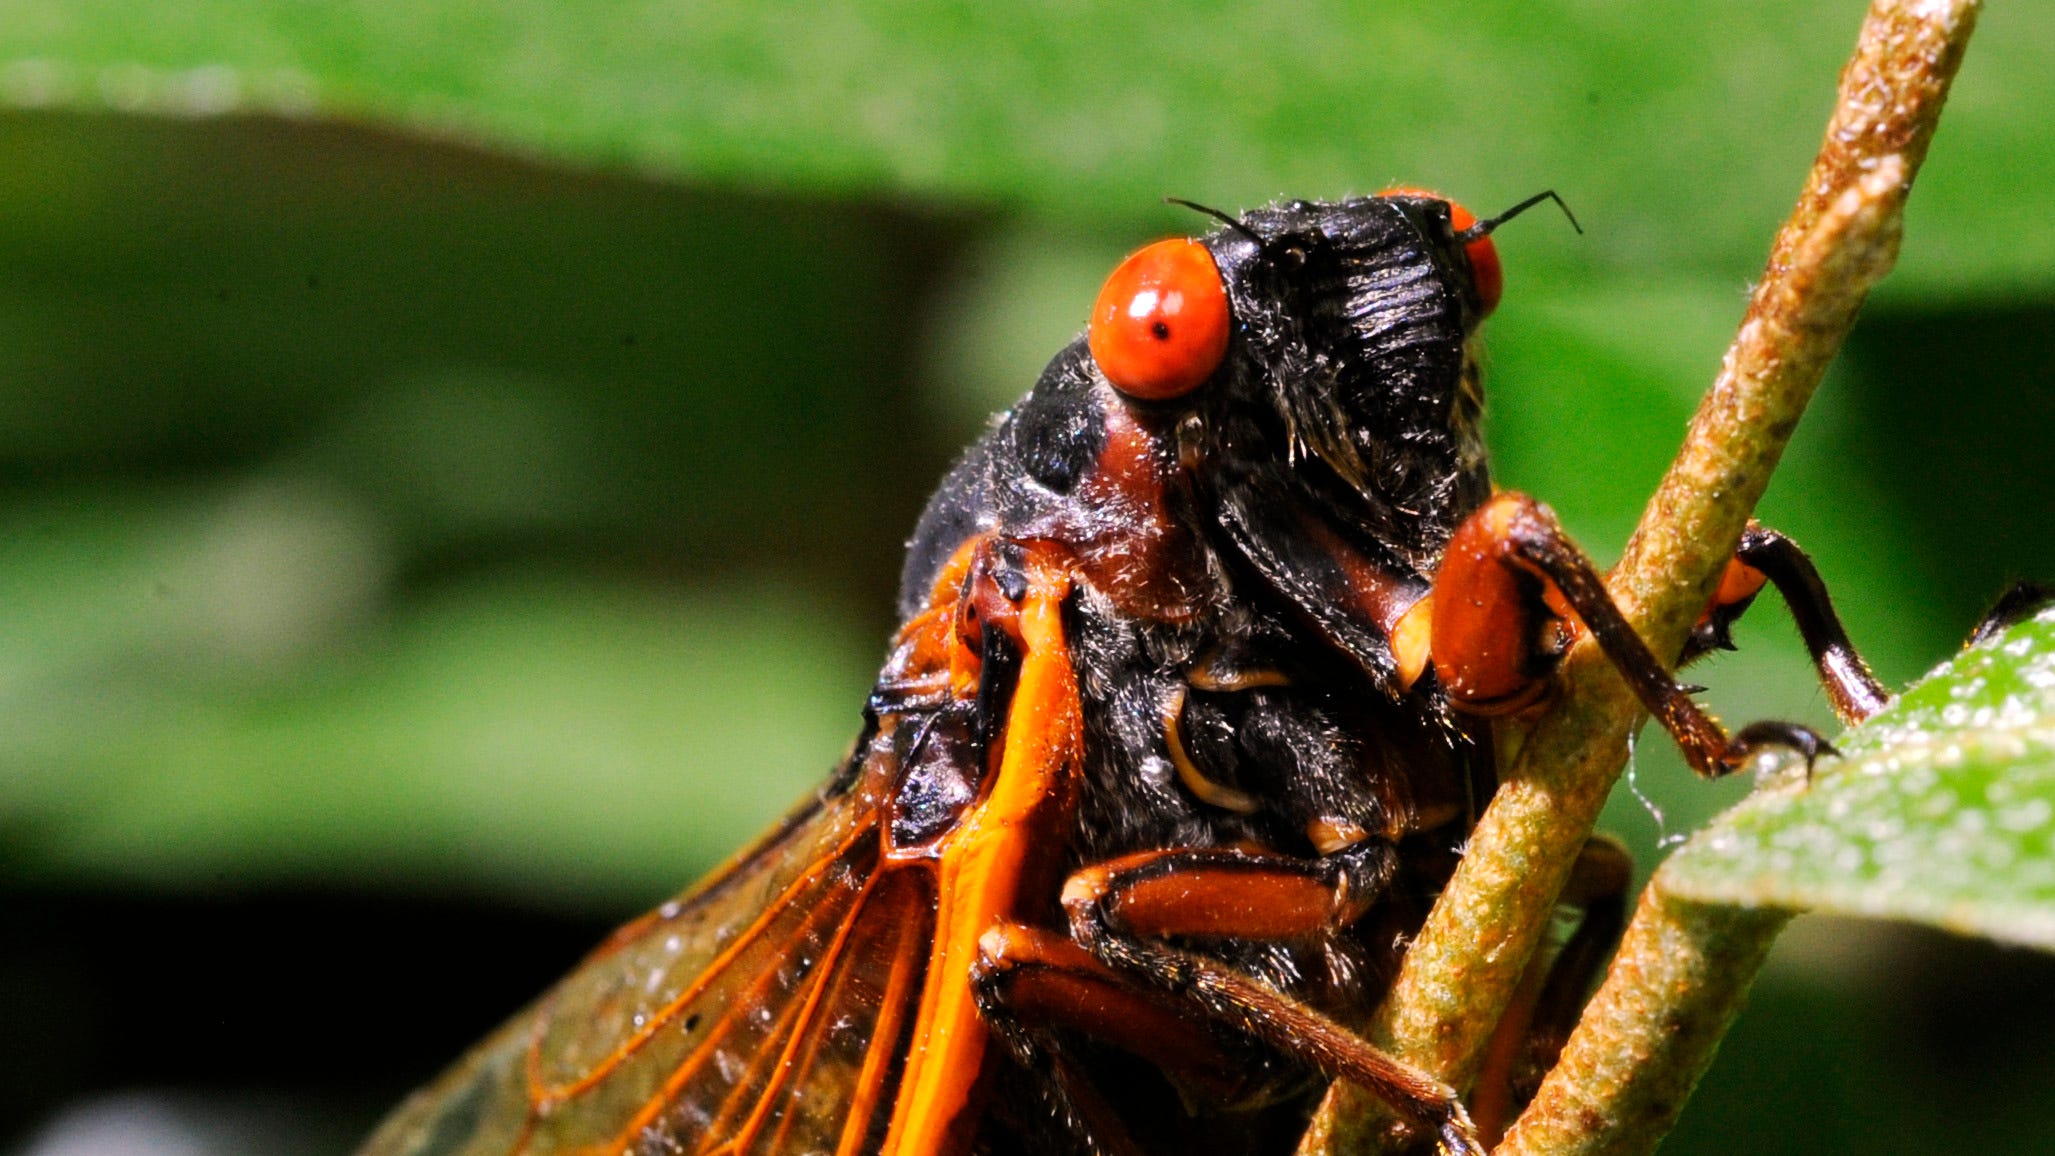 Periodical cicadas to reemerge in Michigan for first time in 17 years